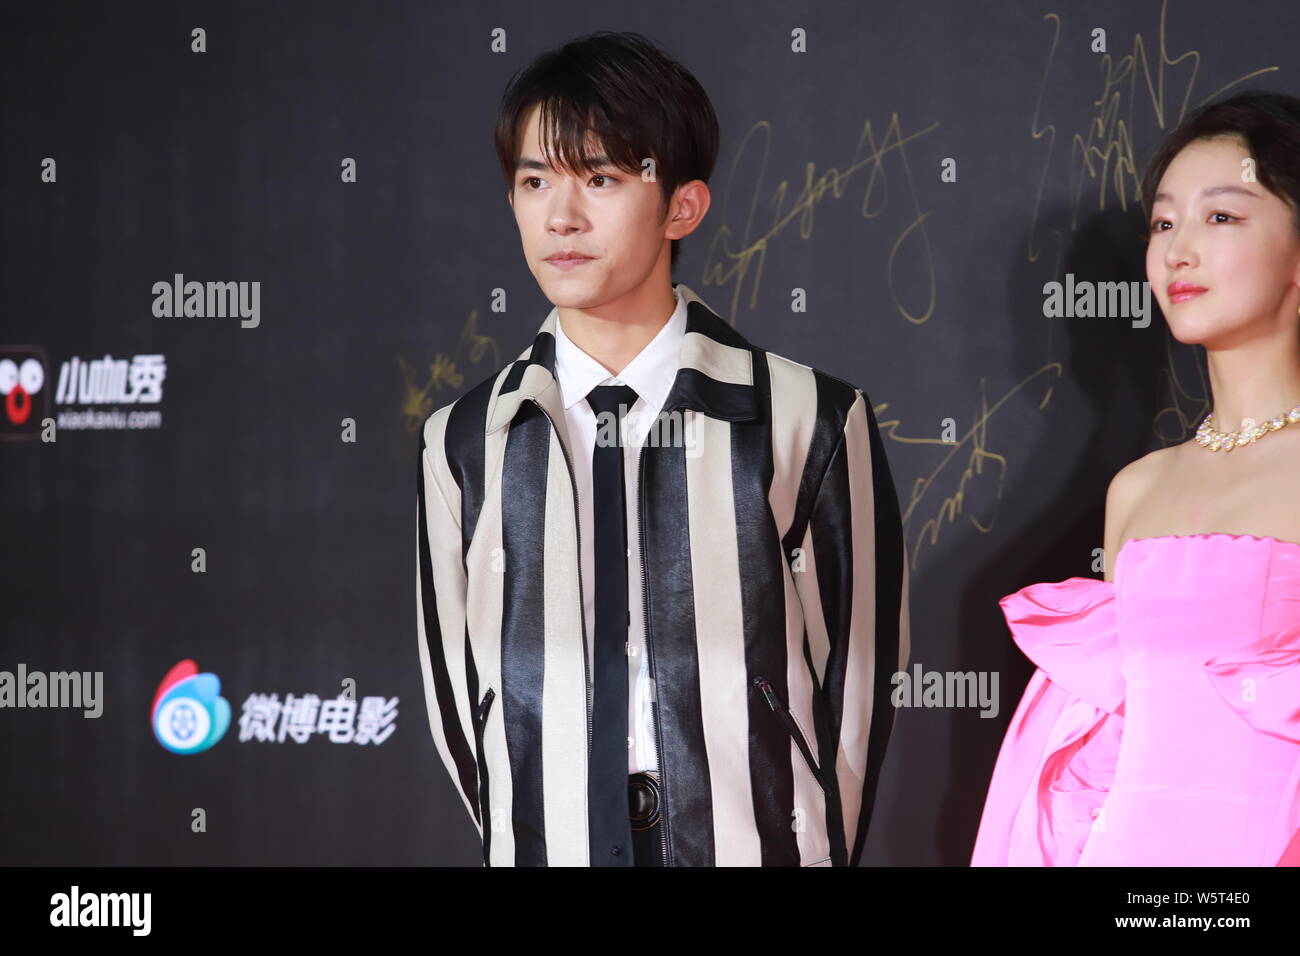 Jackson Yee or Yi Yangqianxi of Chinese boy group TFBoys, left, and Chinese  actress Zhou Dongyu arrive on the red carpet for 2019 Sina Weibo Film Night  in Shanghai, China, 16 June